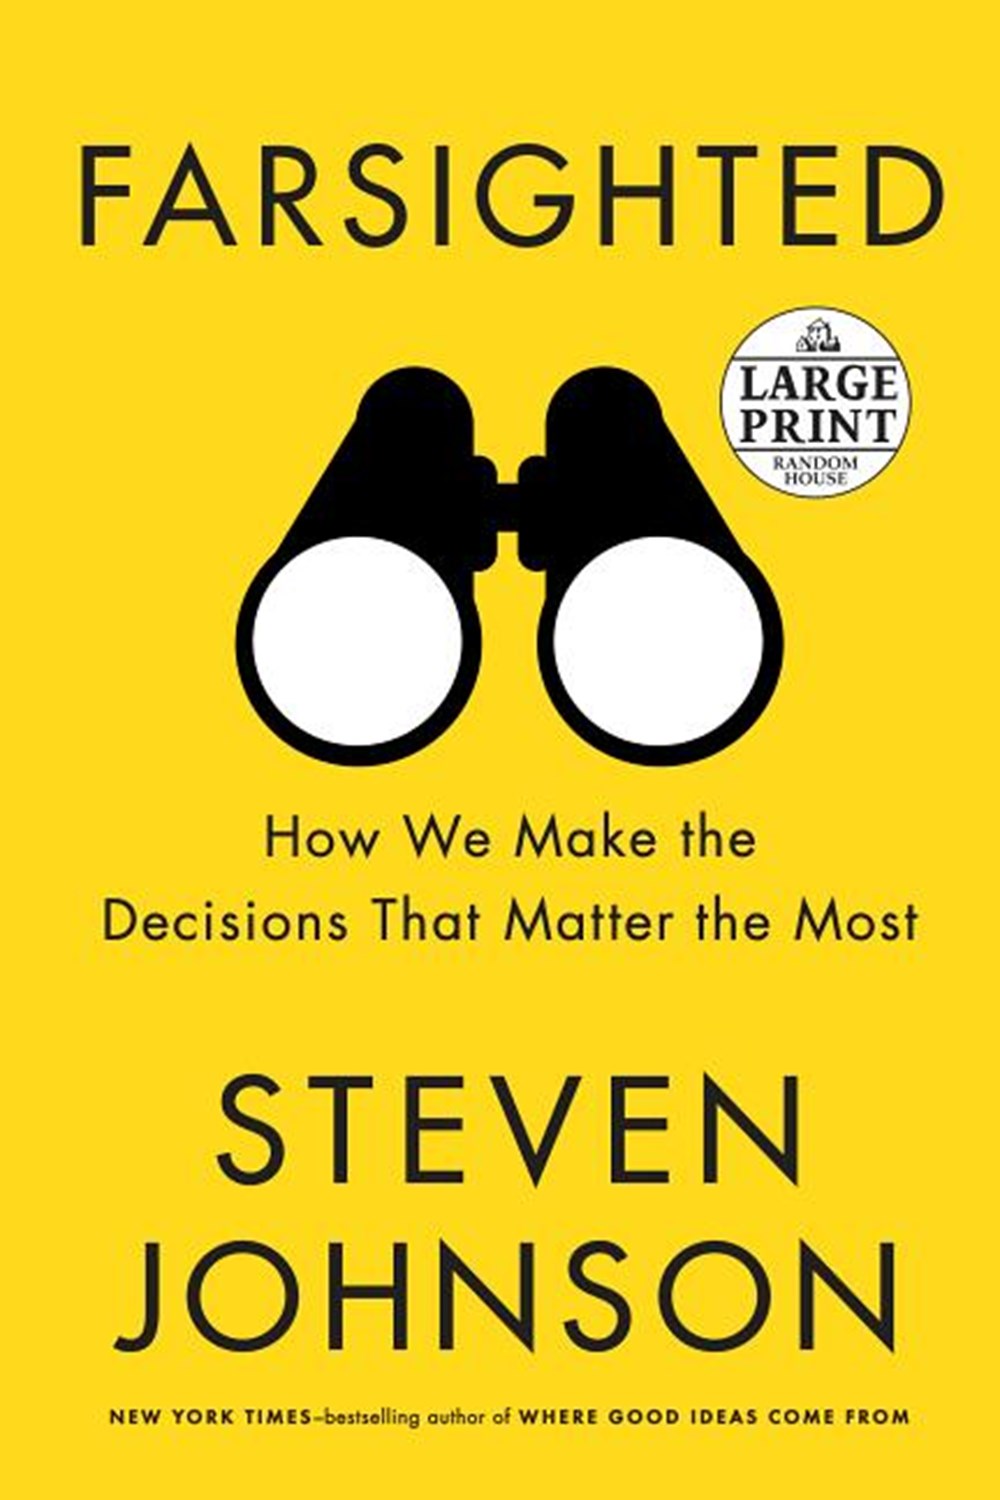 Farsighted How We Make the Decisions That Matter the Most